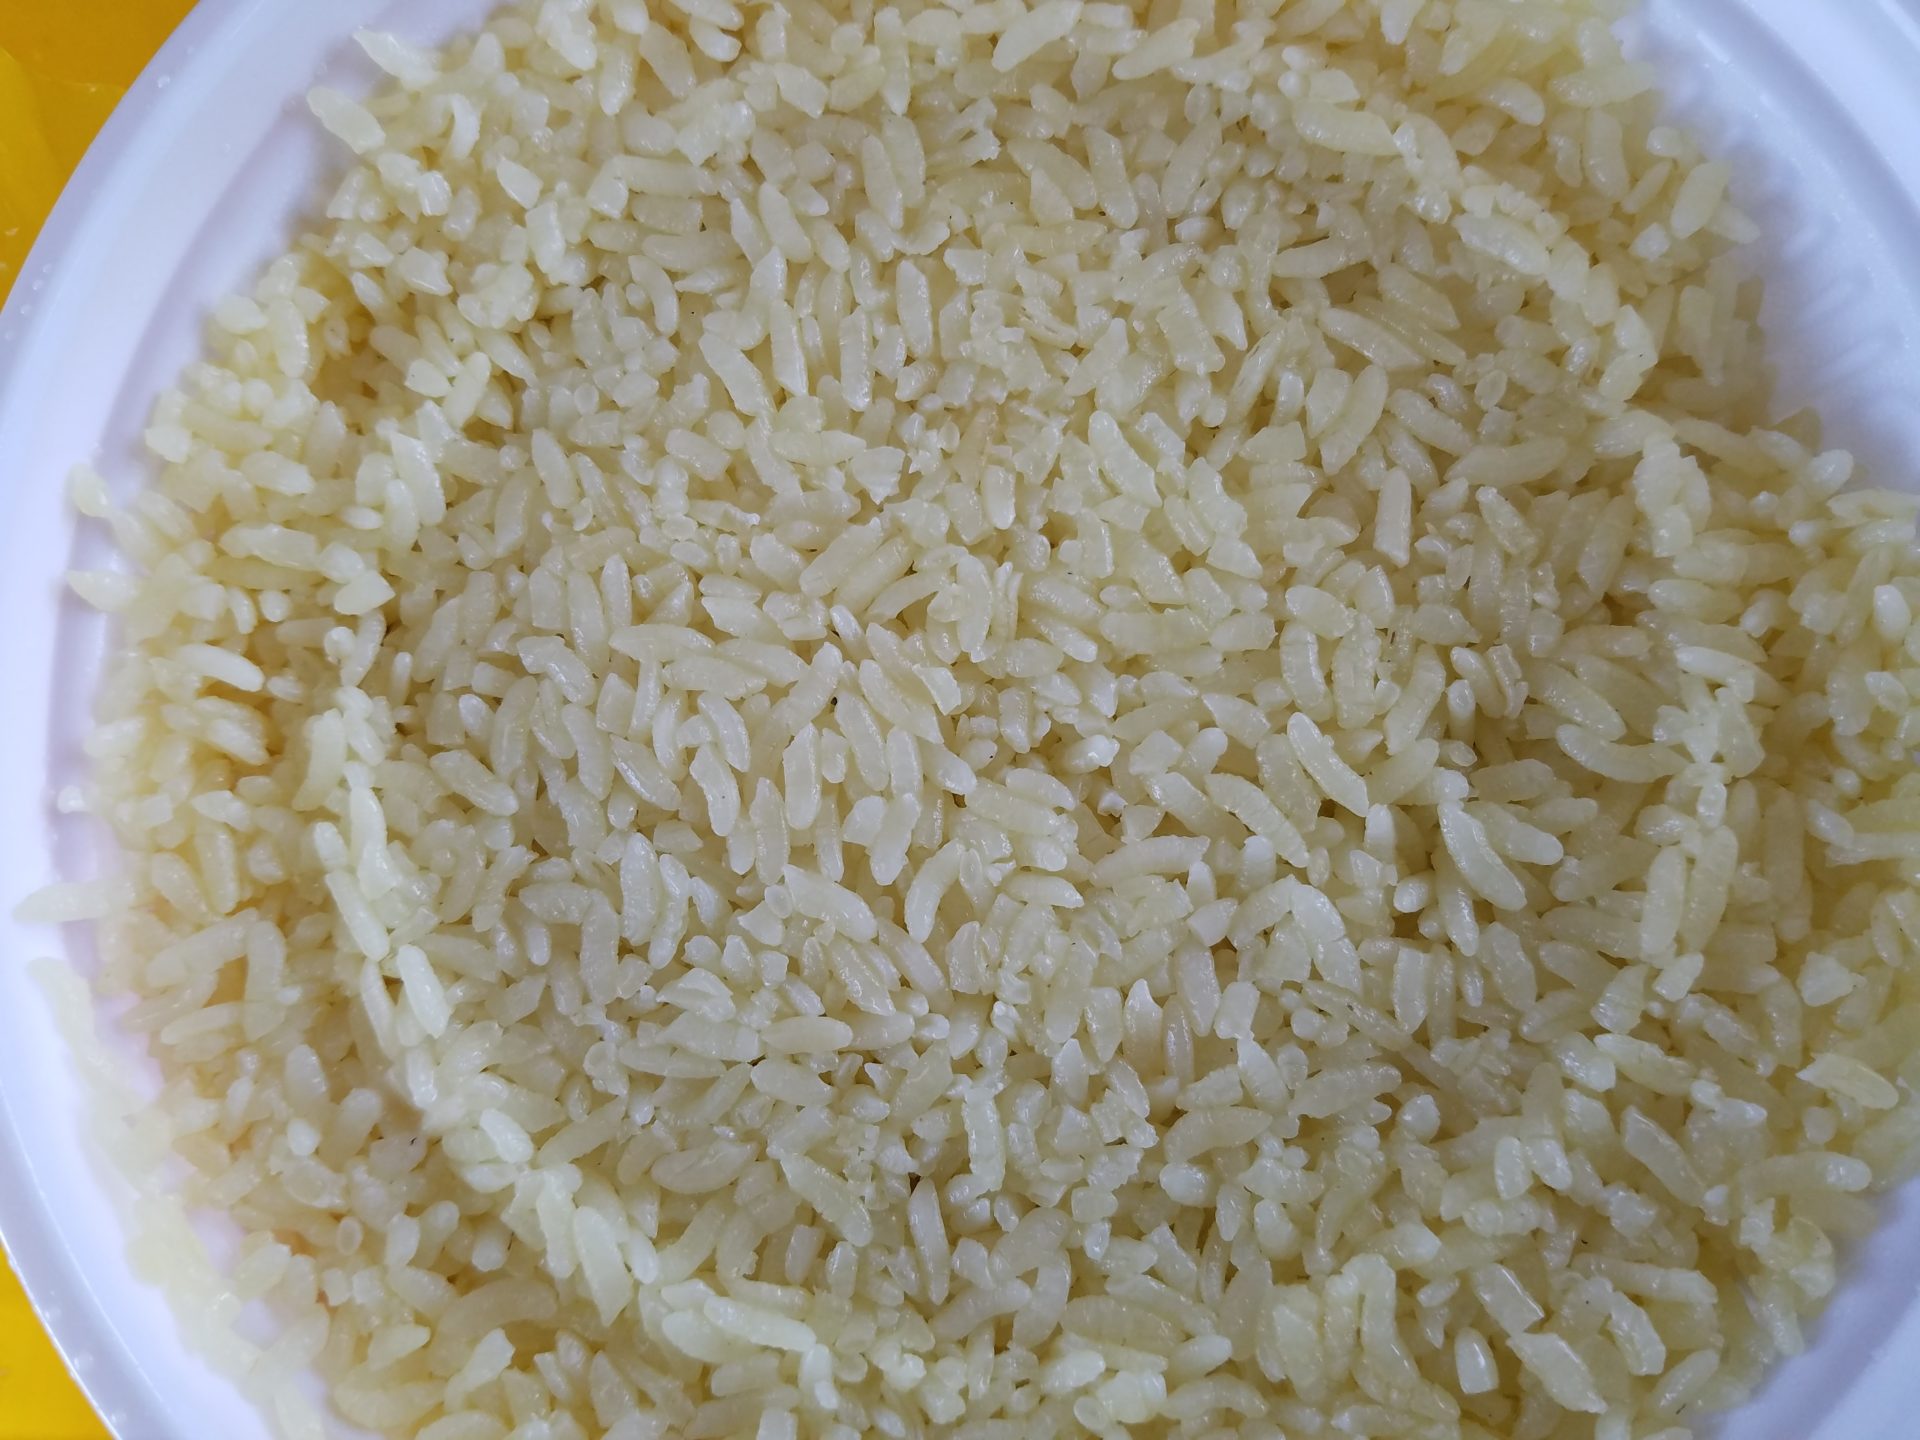 a bowl of rice